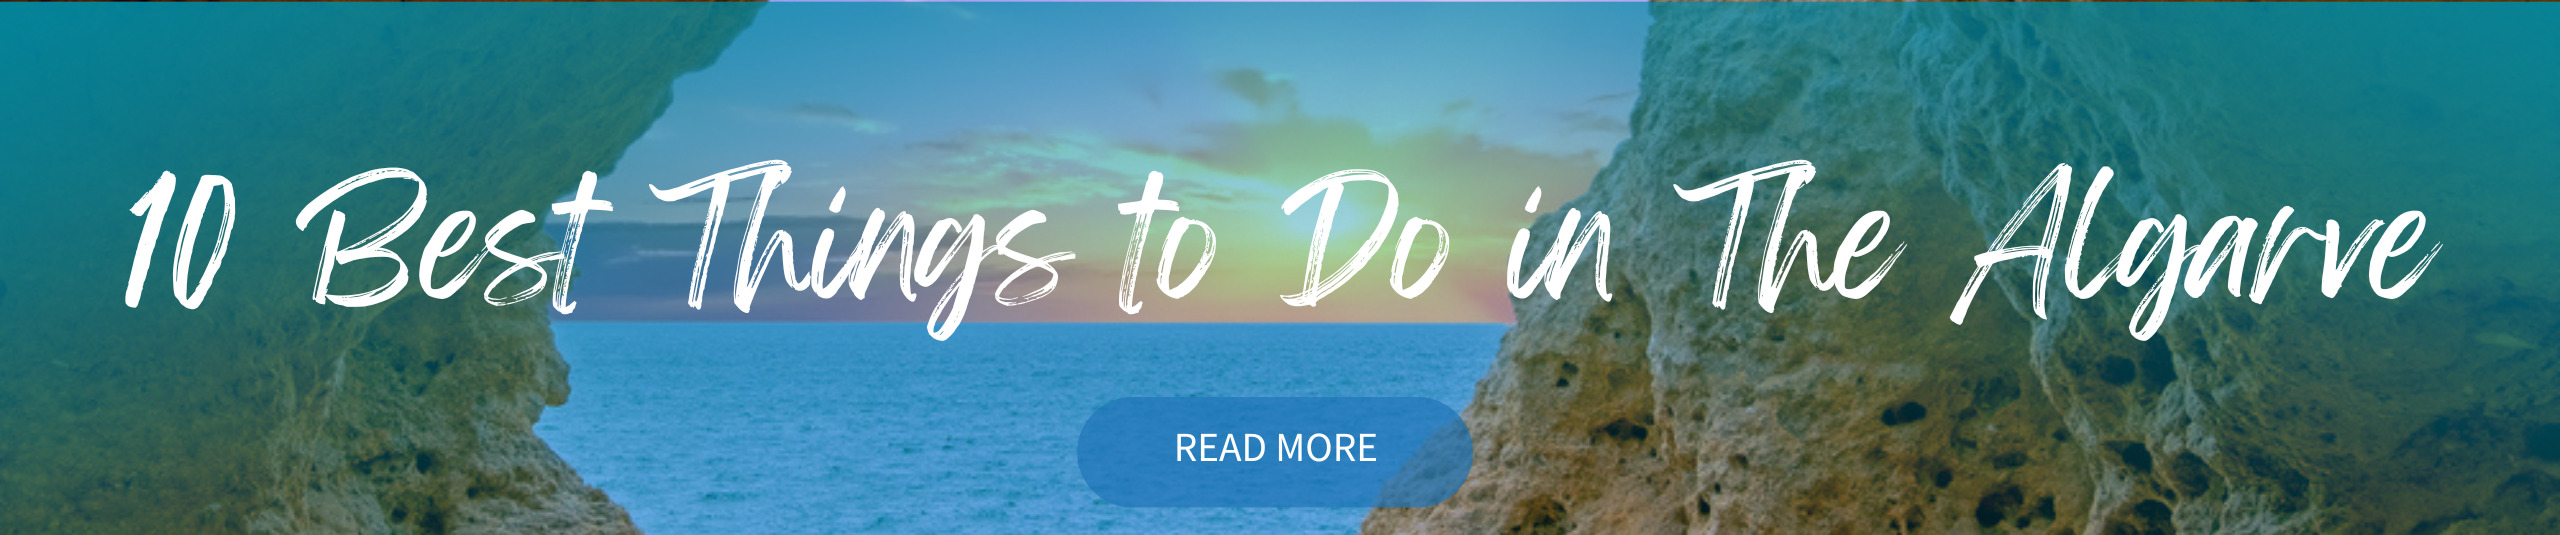 10 Best Things to Do in The Algarve CTA Banner